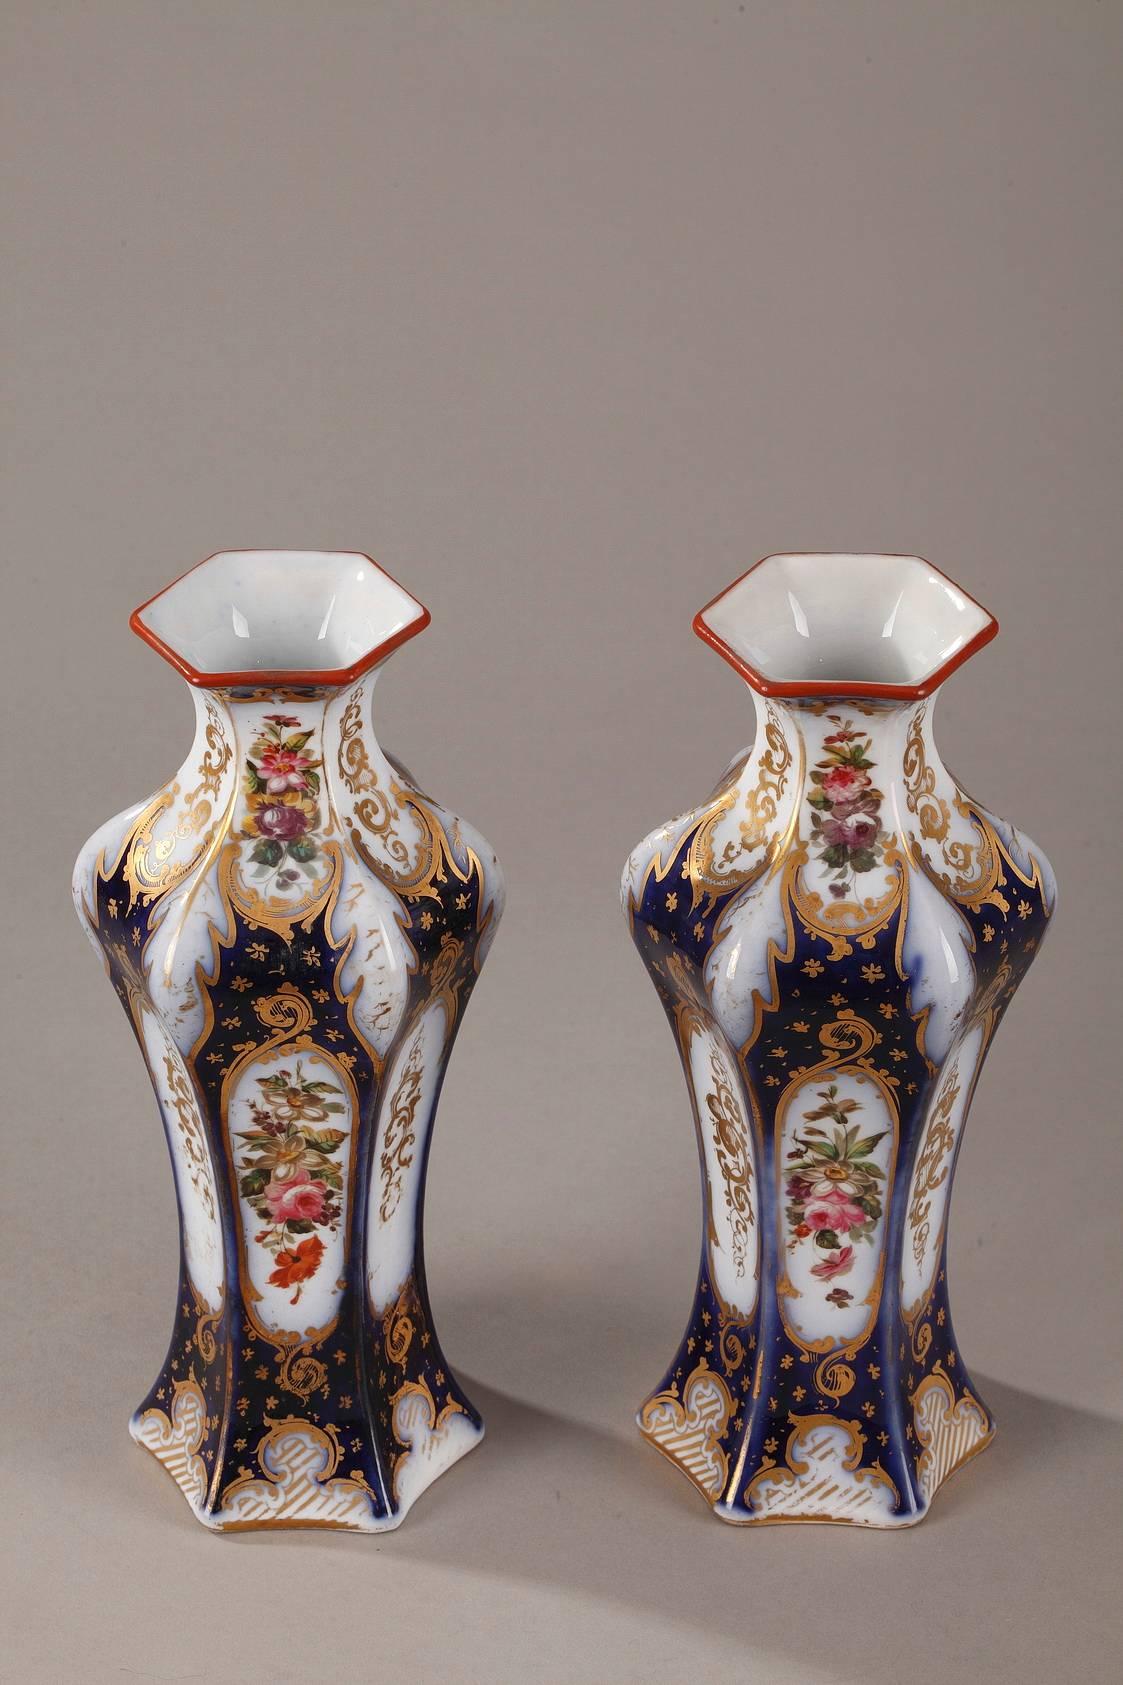 Pair of hexagonal porcelain vases decorated with multicolored flowers. The midnight blue background is highlighted with gilded floral motifs and foliage. Napoleon III period.

circa 1860
Dim: W: 3.9 in – D: 3.9 in – H: 9.4 in
Dim: L: 10cm, P: